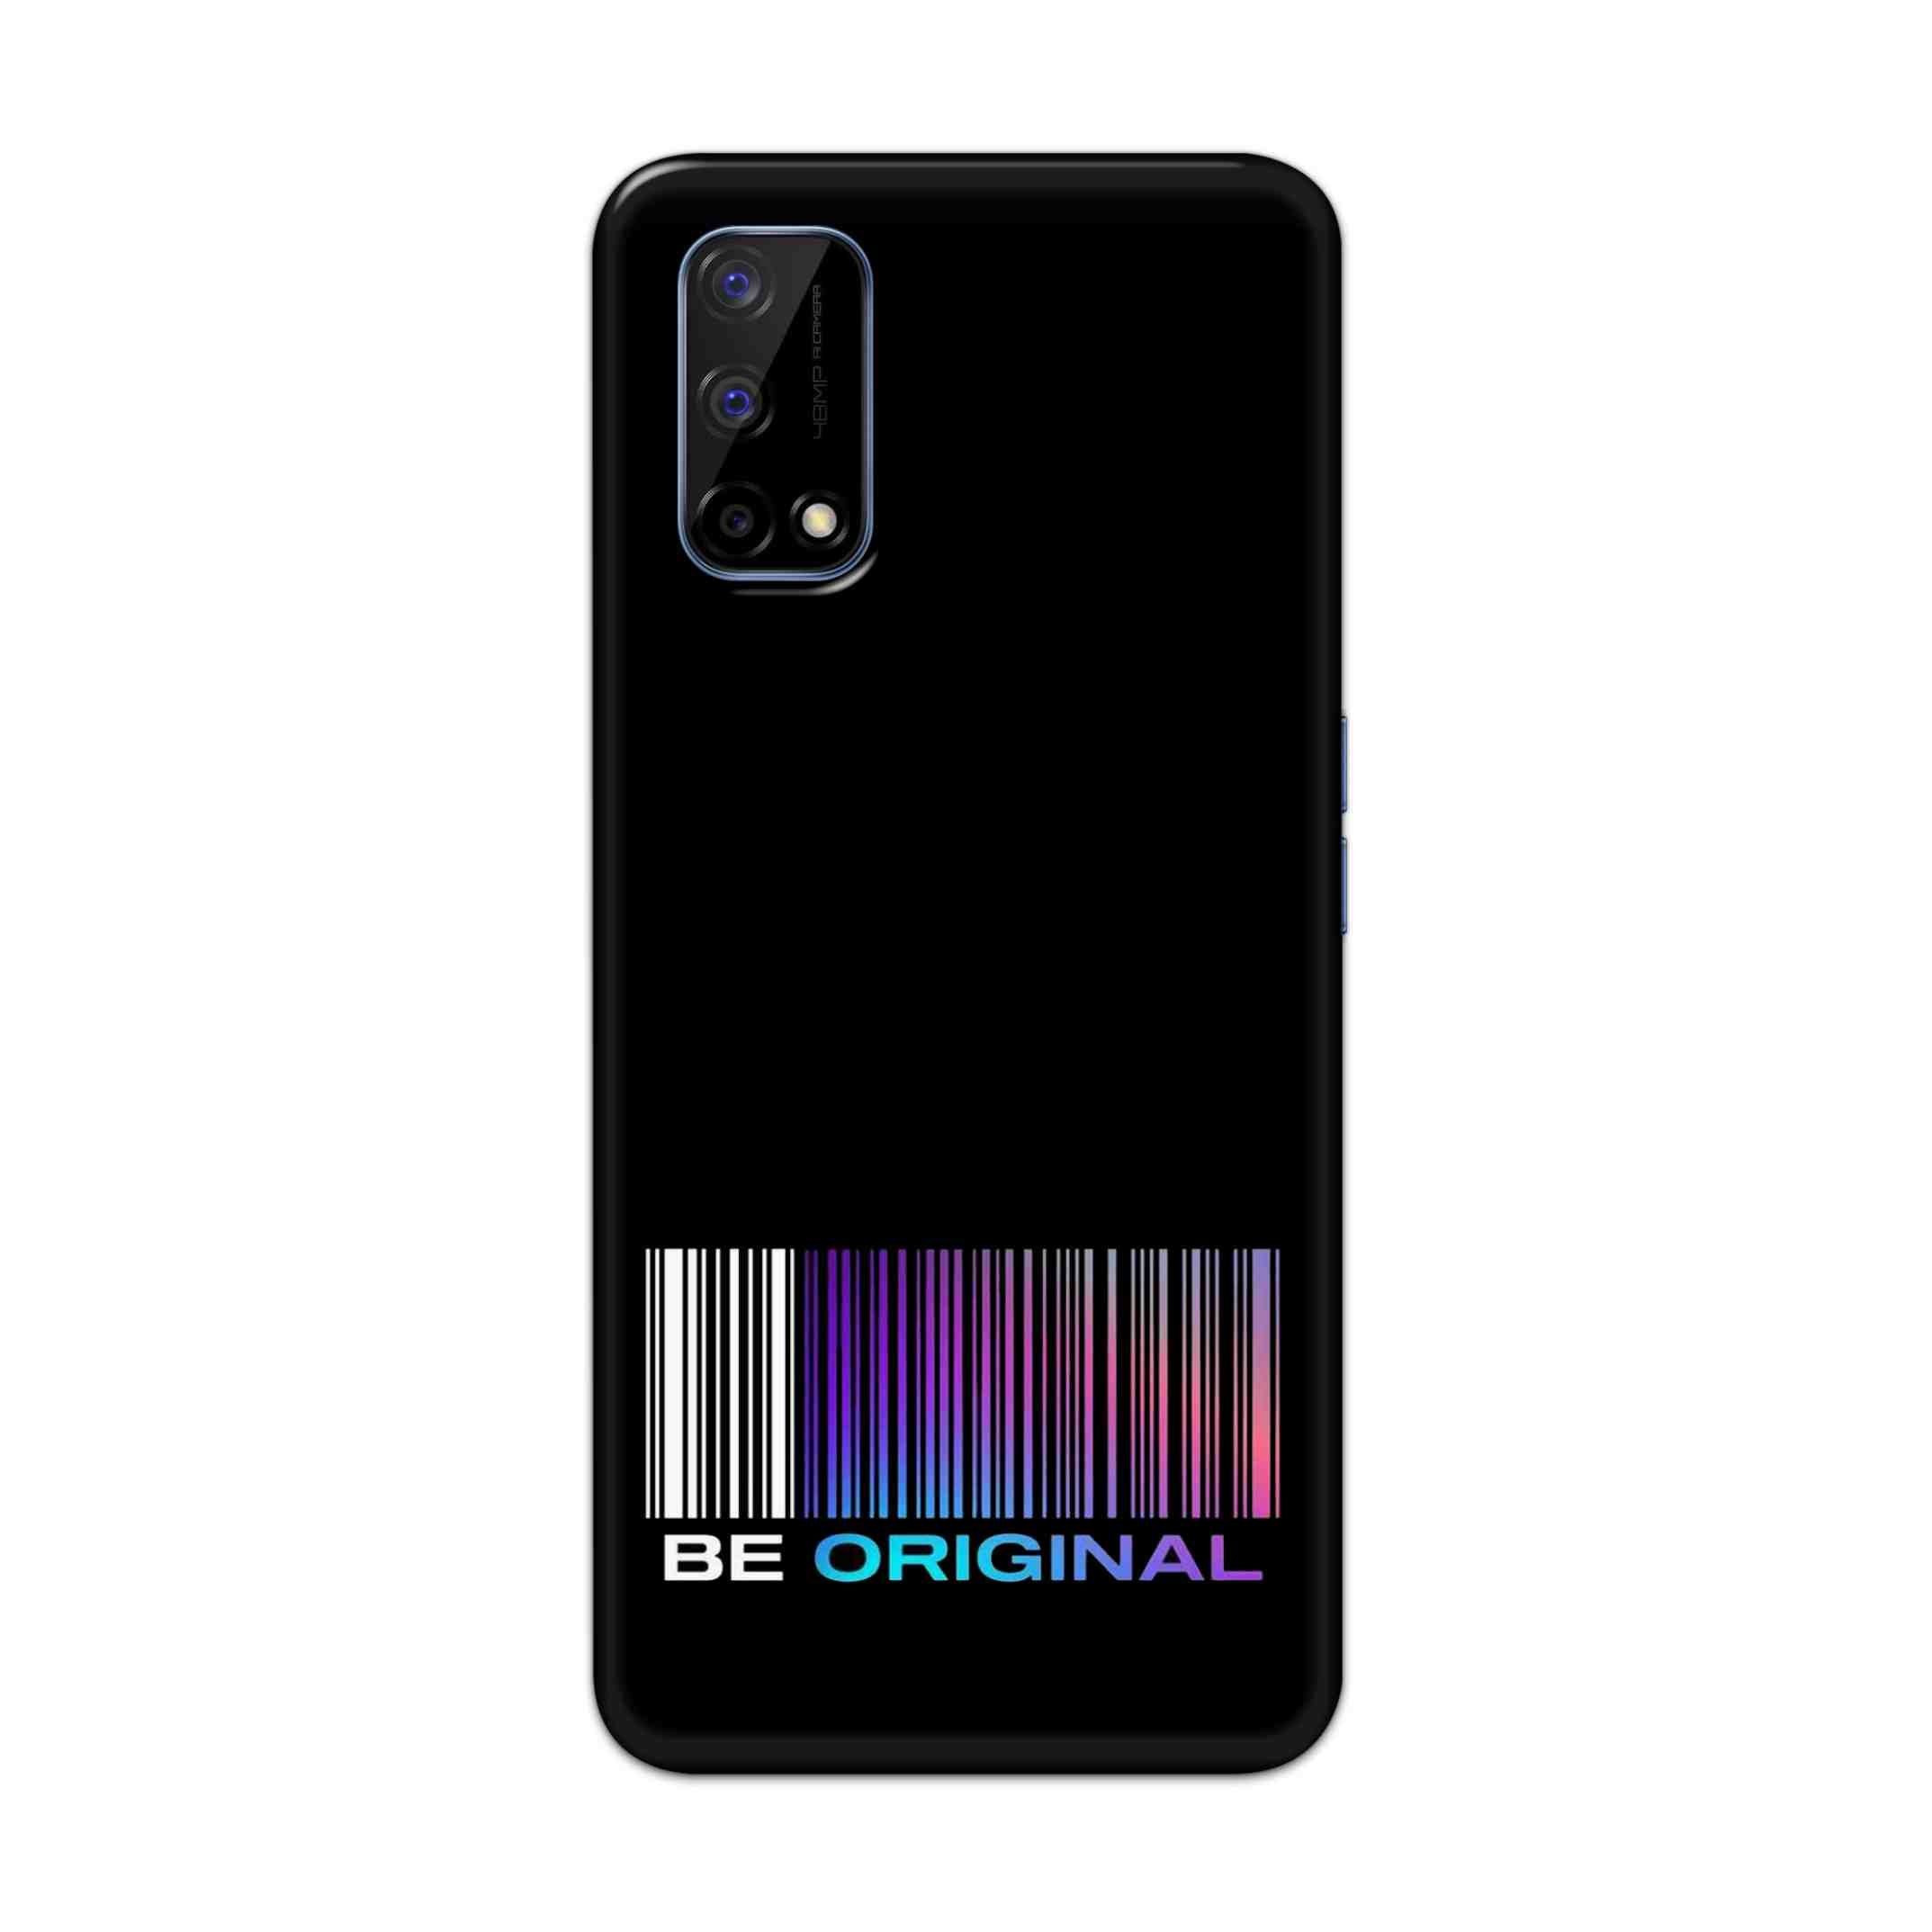 Buy Be Original Hard Back Mobile Phone Case Cover For Realme Narzo 30 Pro Online